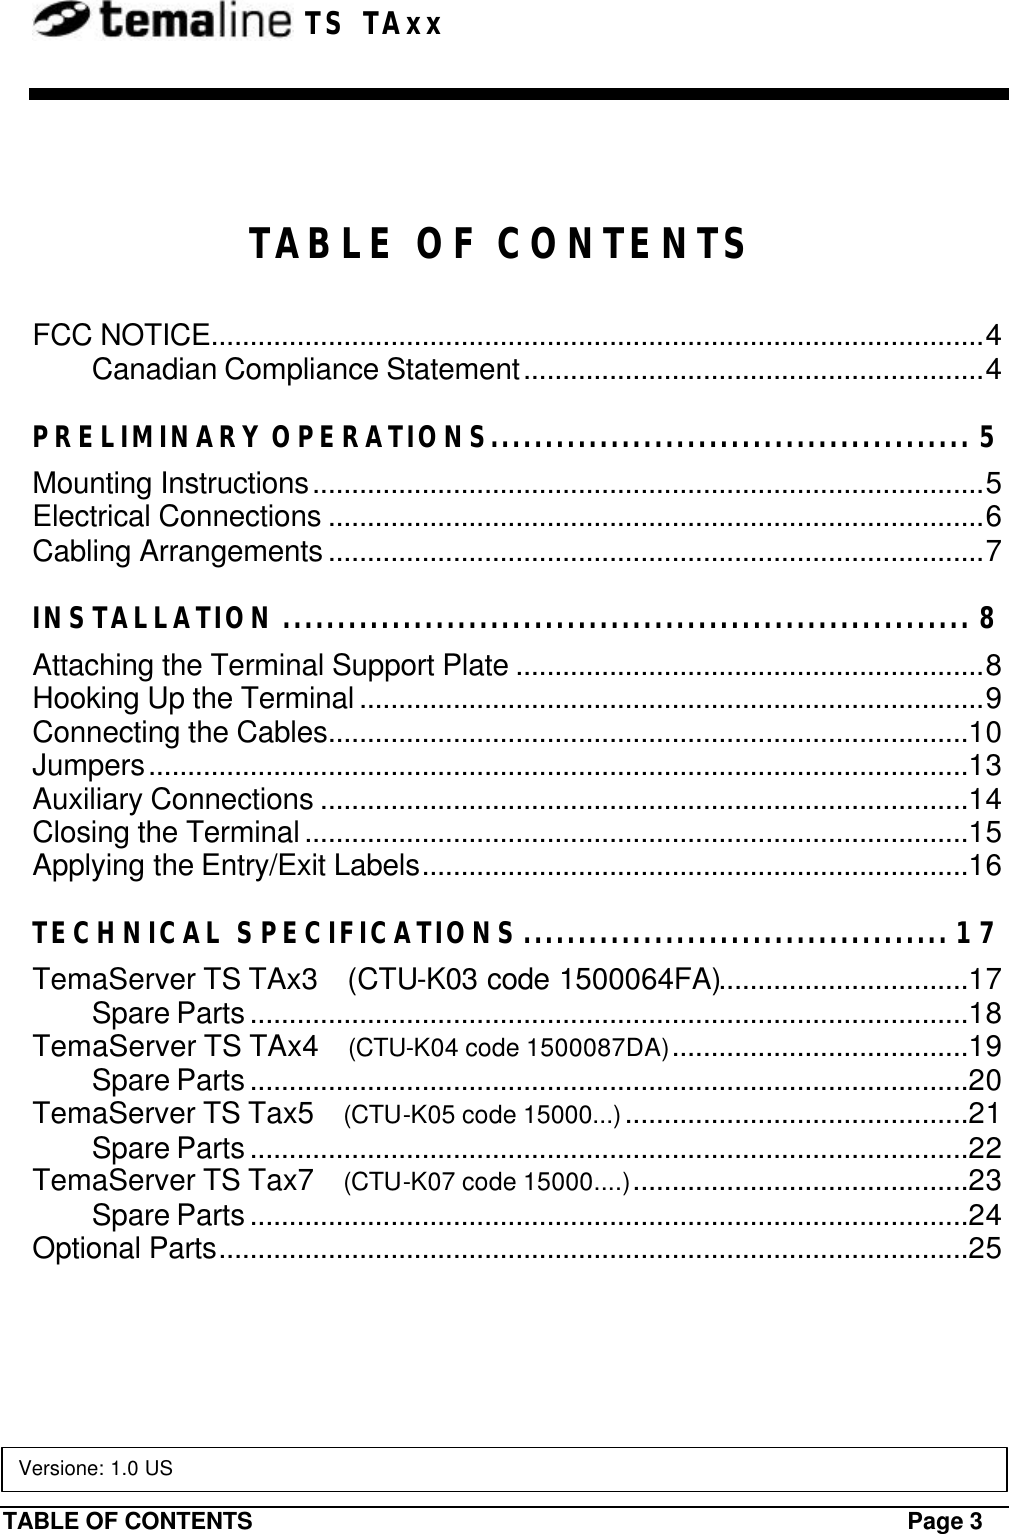 TABLE OF CONTENTS Page 3  TS TAxx  TABLE OF CONTENTS FCC NOTICE...................................................................................................4 Canadian Compliance Statement...........................................................4 PRELIMINARY OPERATIONS............................................ 5 Mounting Instructions......................................................................................5 Electrical Connections ....................................................................................6 Cabling Arrangements ....................................................................................7 INSTALLATION ............................................................... 8 Attaching the Terminal Support Plate ............................................................8 Hooking Up the Terminal ................................................................................9 Connecting the Cables..................................................................................10 Jumpers.........................................................................................................13 Auxiliary Connections ...................................................................................14 Closing the Terminal .....................................................................................15 Applying the Entry/Exit Labels......................................................................16 TECHNICAL SPECIFICATIONS....................................... 17 TemaServer TS TAx3    (CTU-K03 code 1500064FA)................................17 Spare Parts ............................................................................................18 TemaServer TS TAx4    (CTU-K04 code 1500087DA)......................................19 Spare Parts ............................................................................................20 TemaServer TS Tax5    (CTU-K05 code 15000...)............................................21 Spare Parts ............................................................................................22 TemaServer TS Tax7    (CTU-K07 code 15000....)...........................................23 Spare Parts ............................................................................................24 Optional Parts................................................................................................25  Versione: 1.0 US 